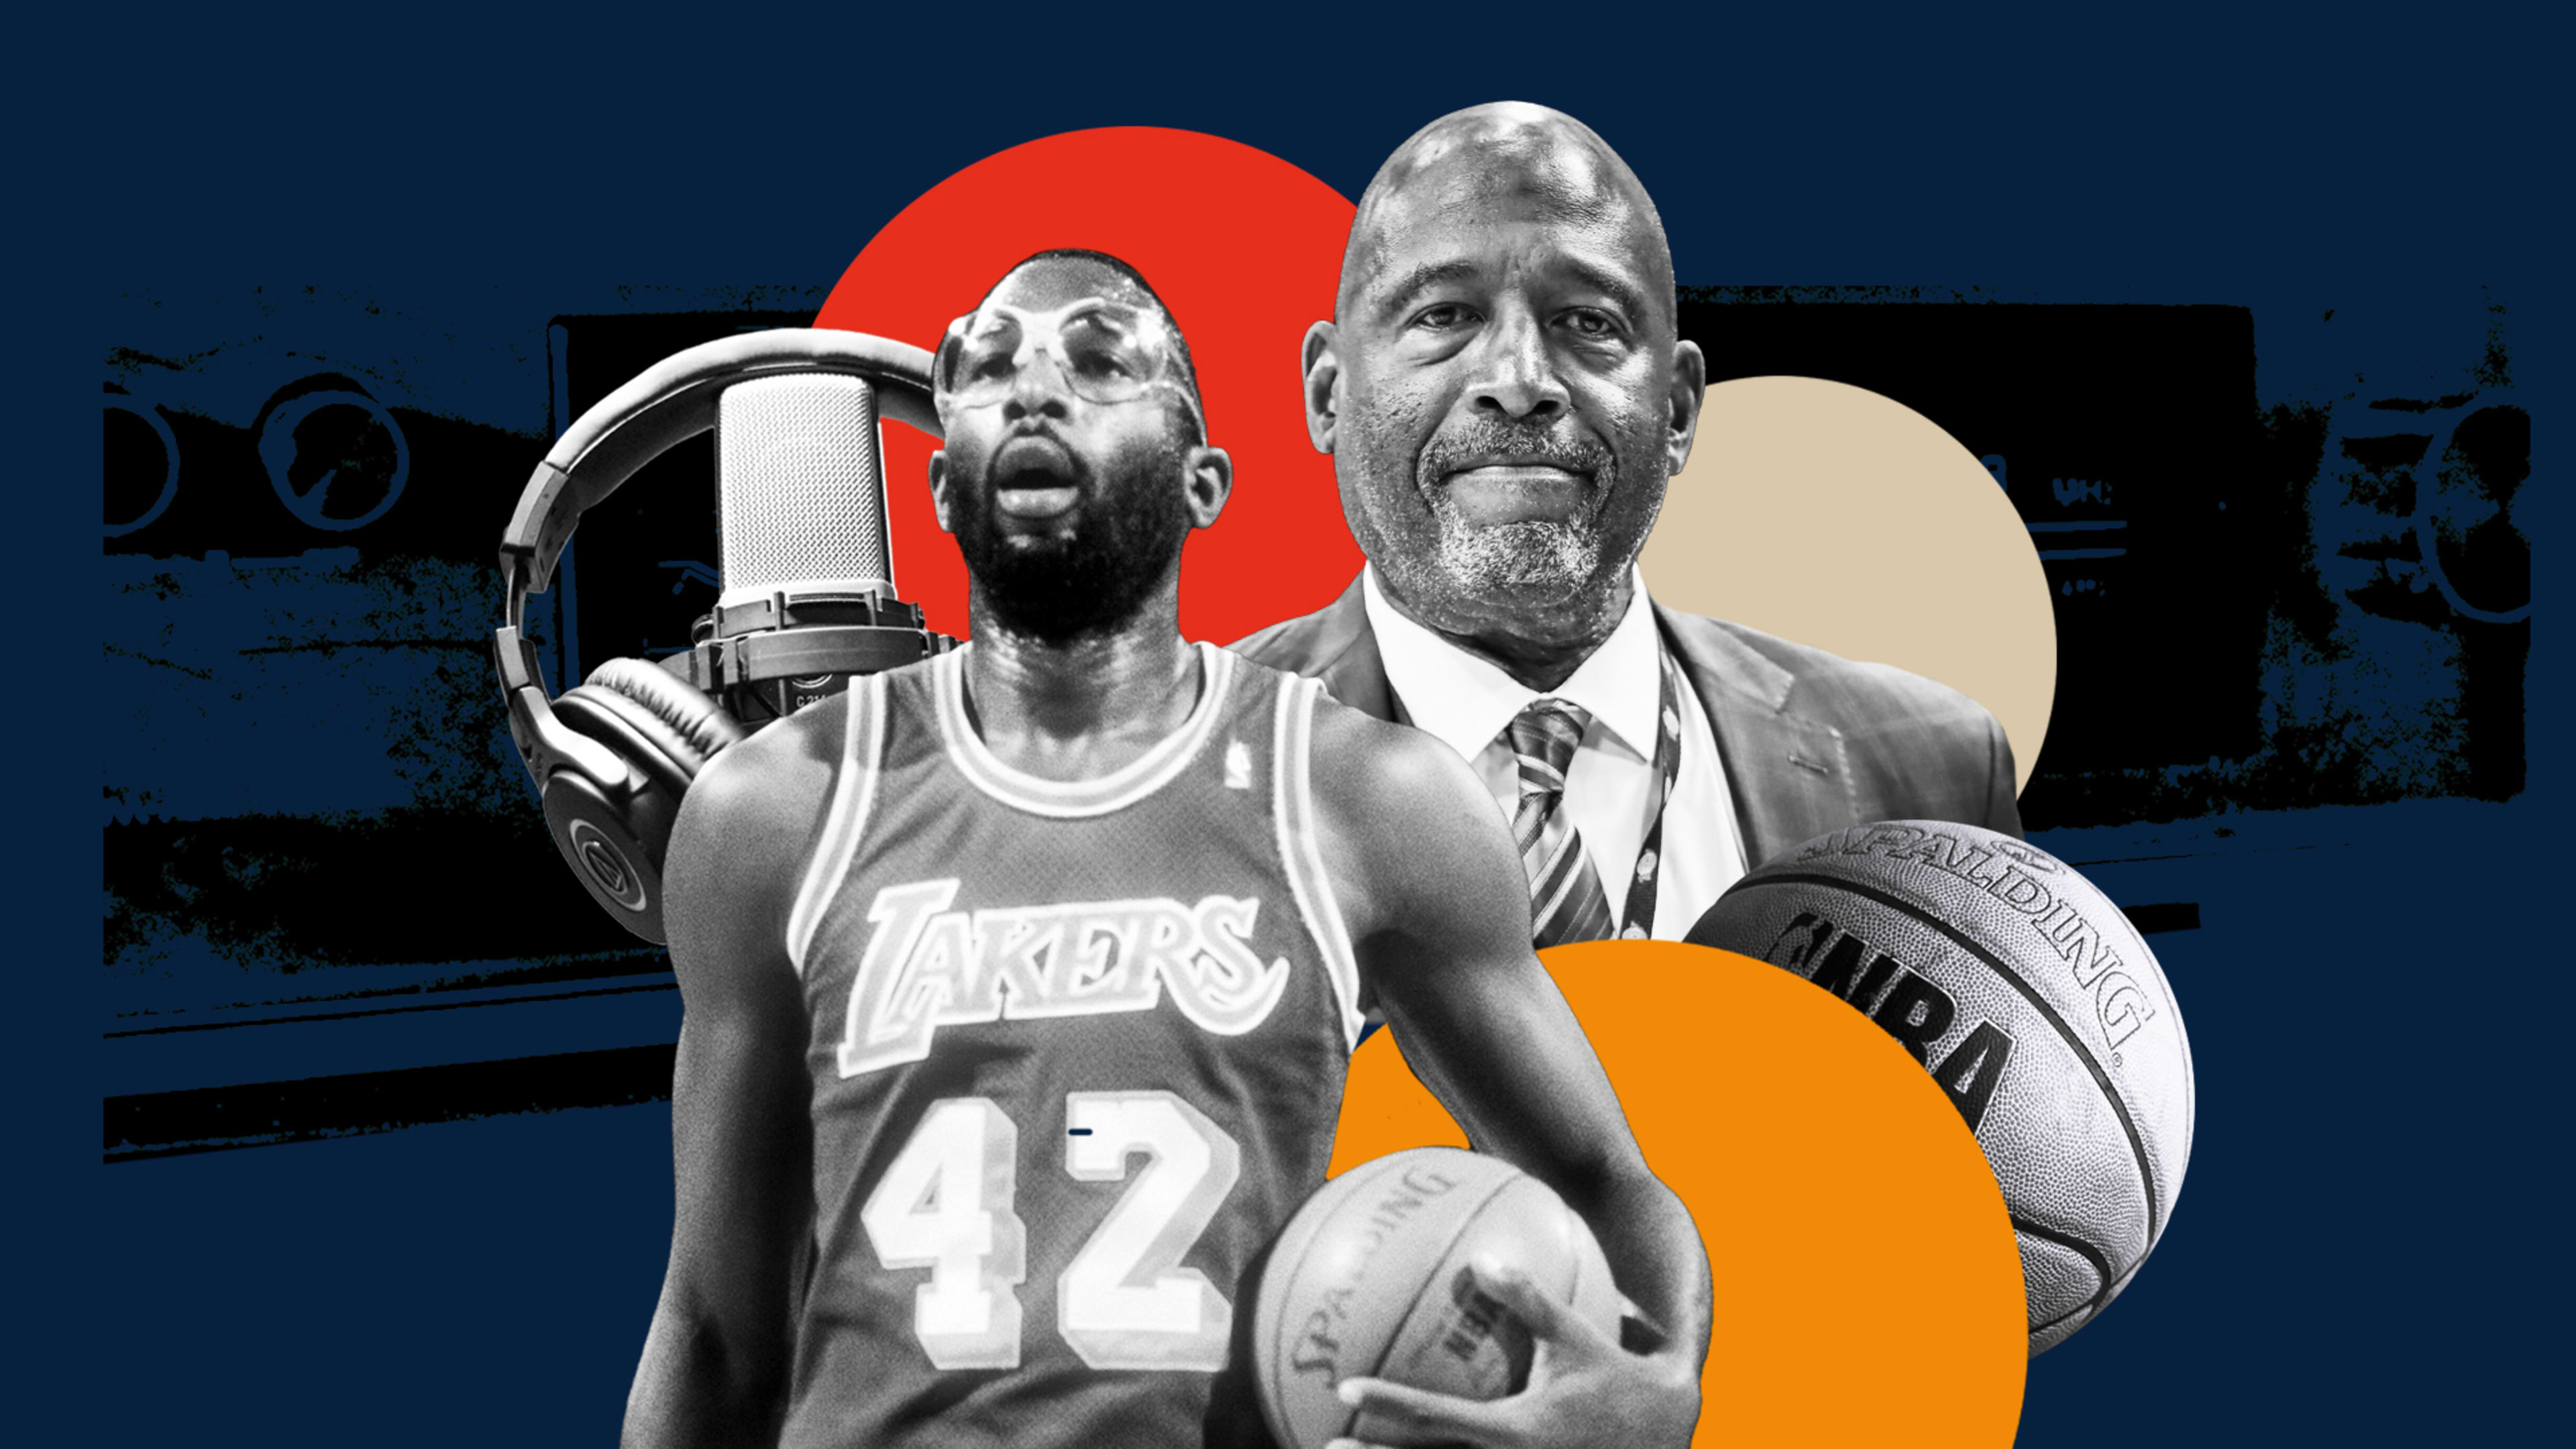 Life in the Gig Economy: NBA legend James Worthy on connecting with fans through Cameo